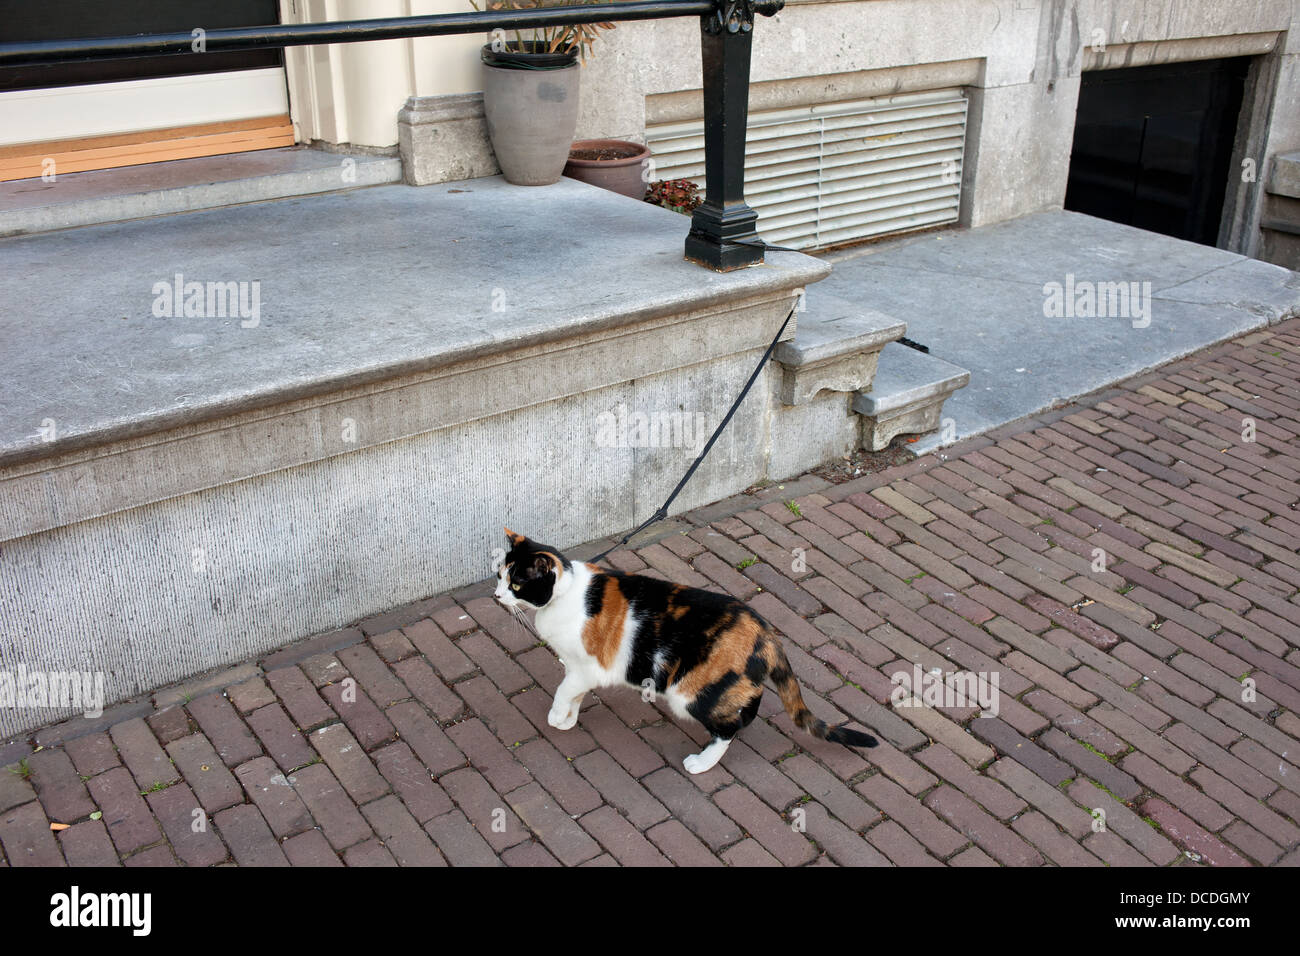 Well groomed cat on a leash attached to balustrade of a house vestibule. Stock Photo